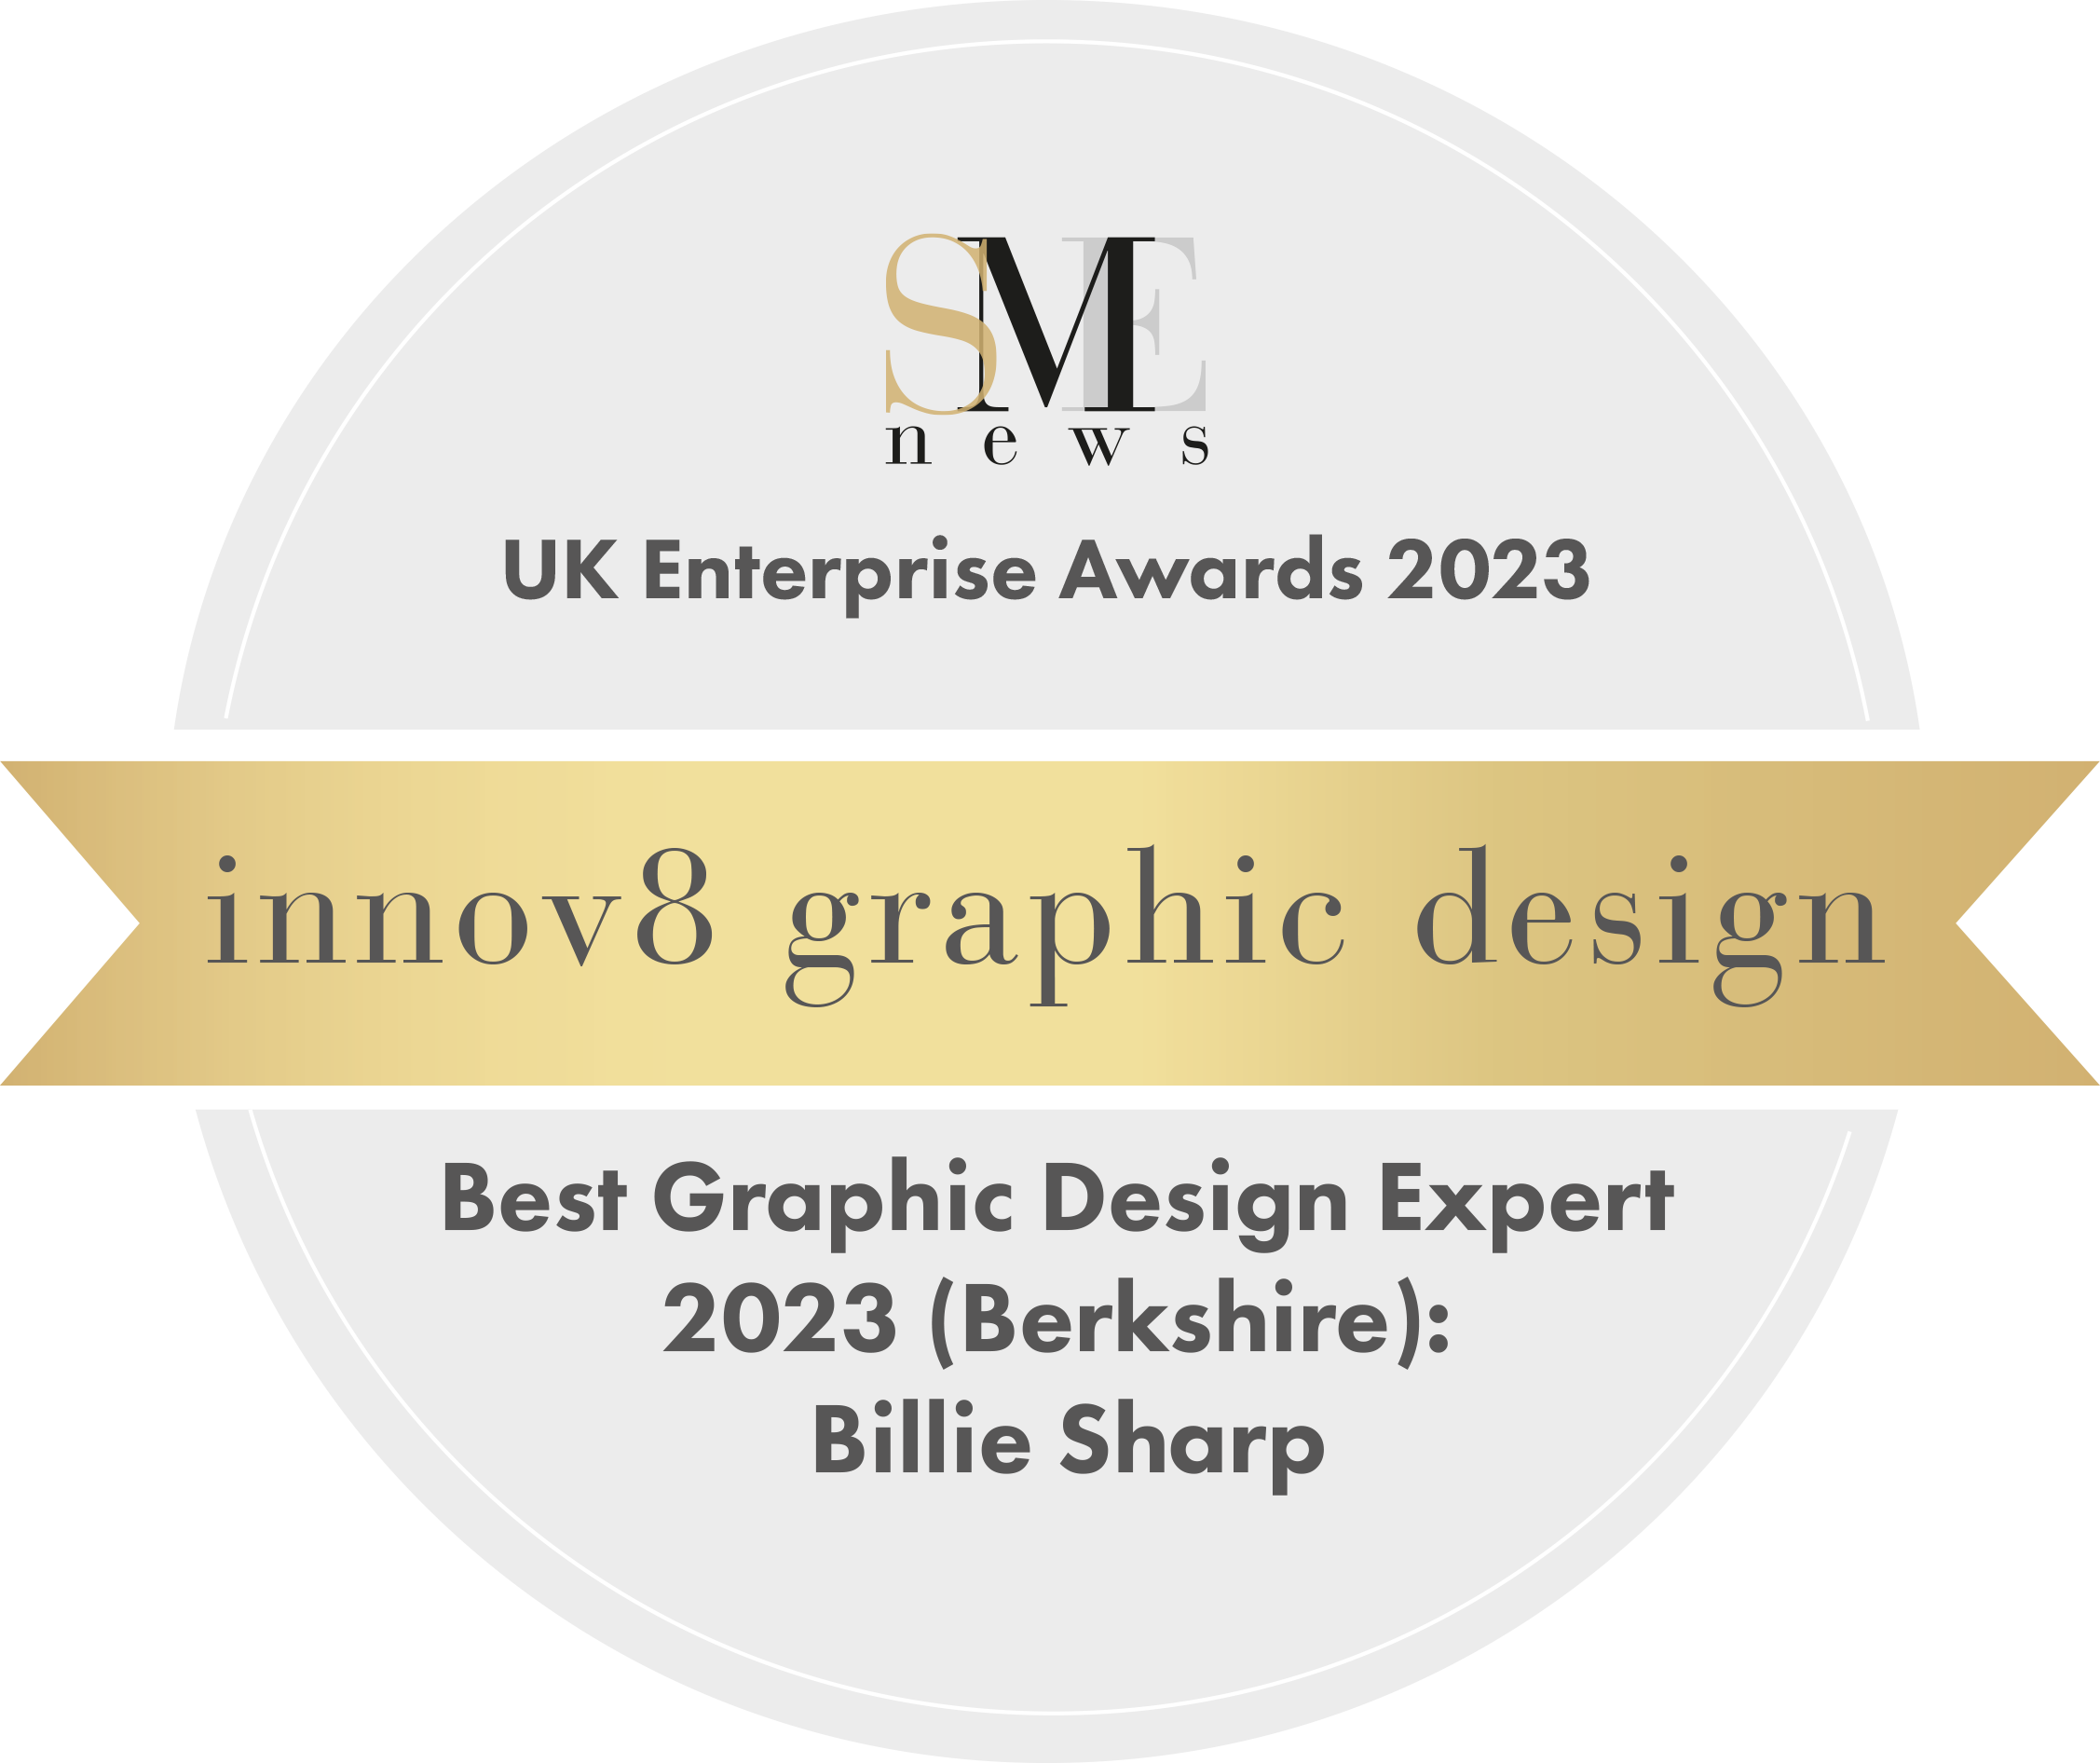 innov8 graphic design is the proud winner of the Best Graphic Design Expert 2023 with the UK Enterprise Awards